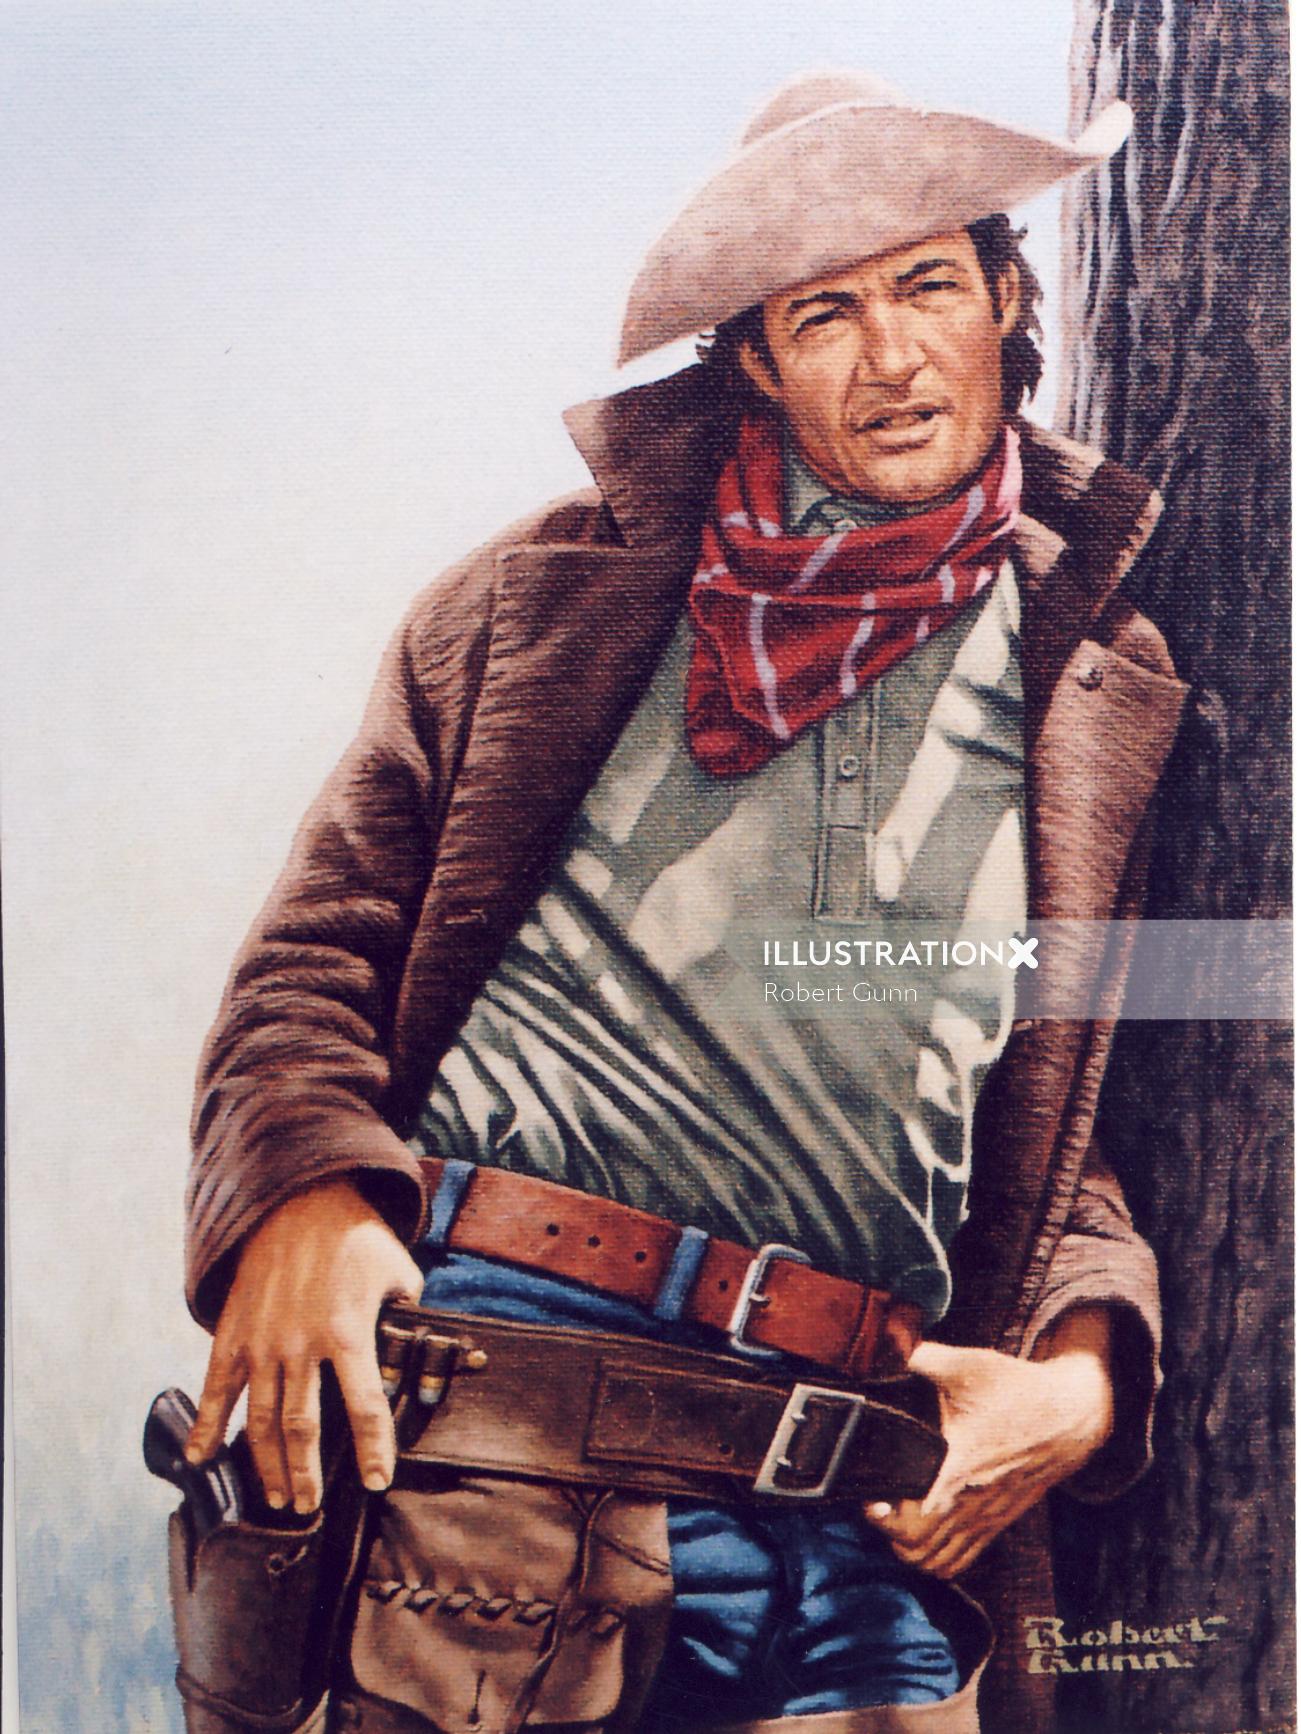 Illustration of outlaw leaning against a tree by Robert Gunn